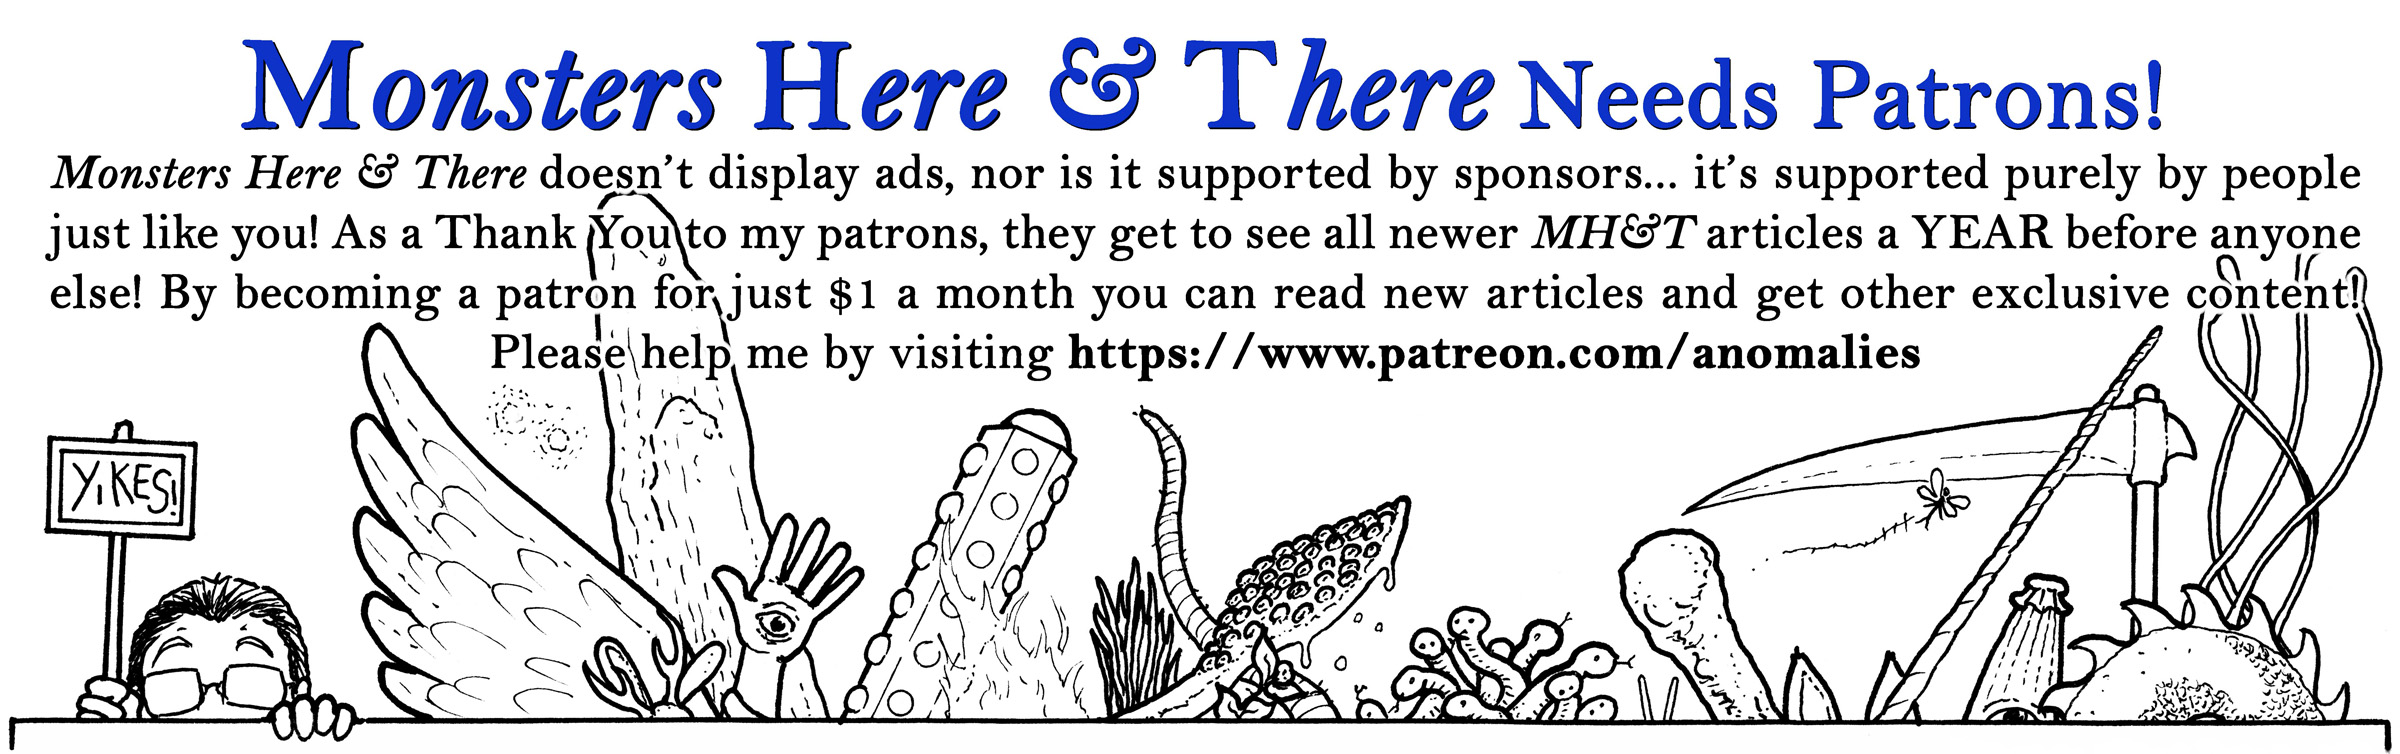 Become a Patron... Help MH&T!